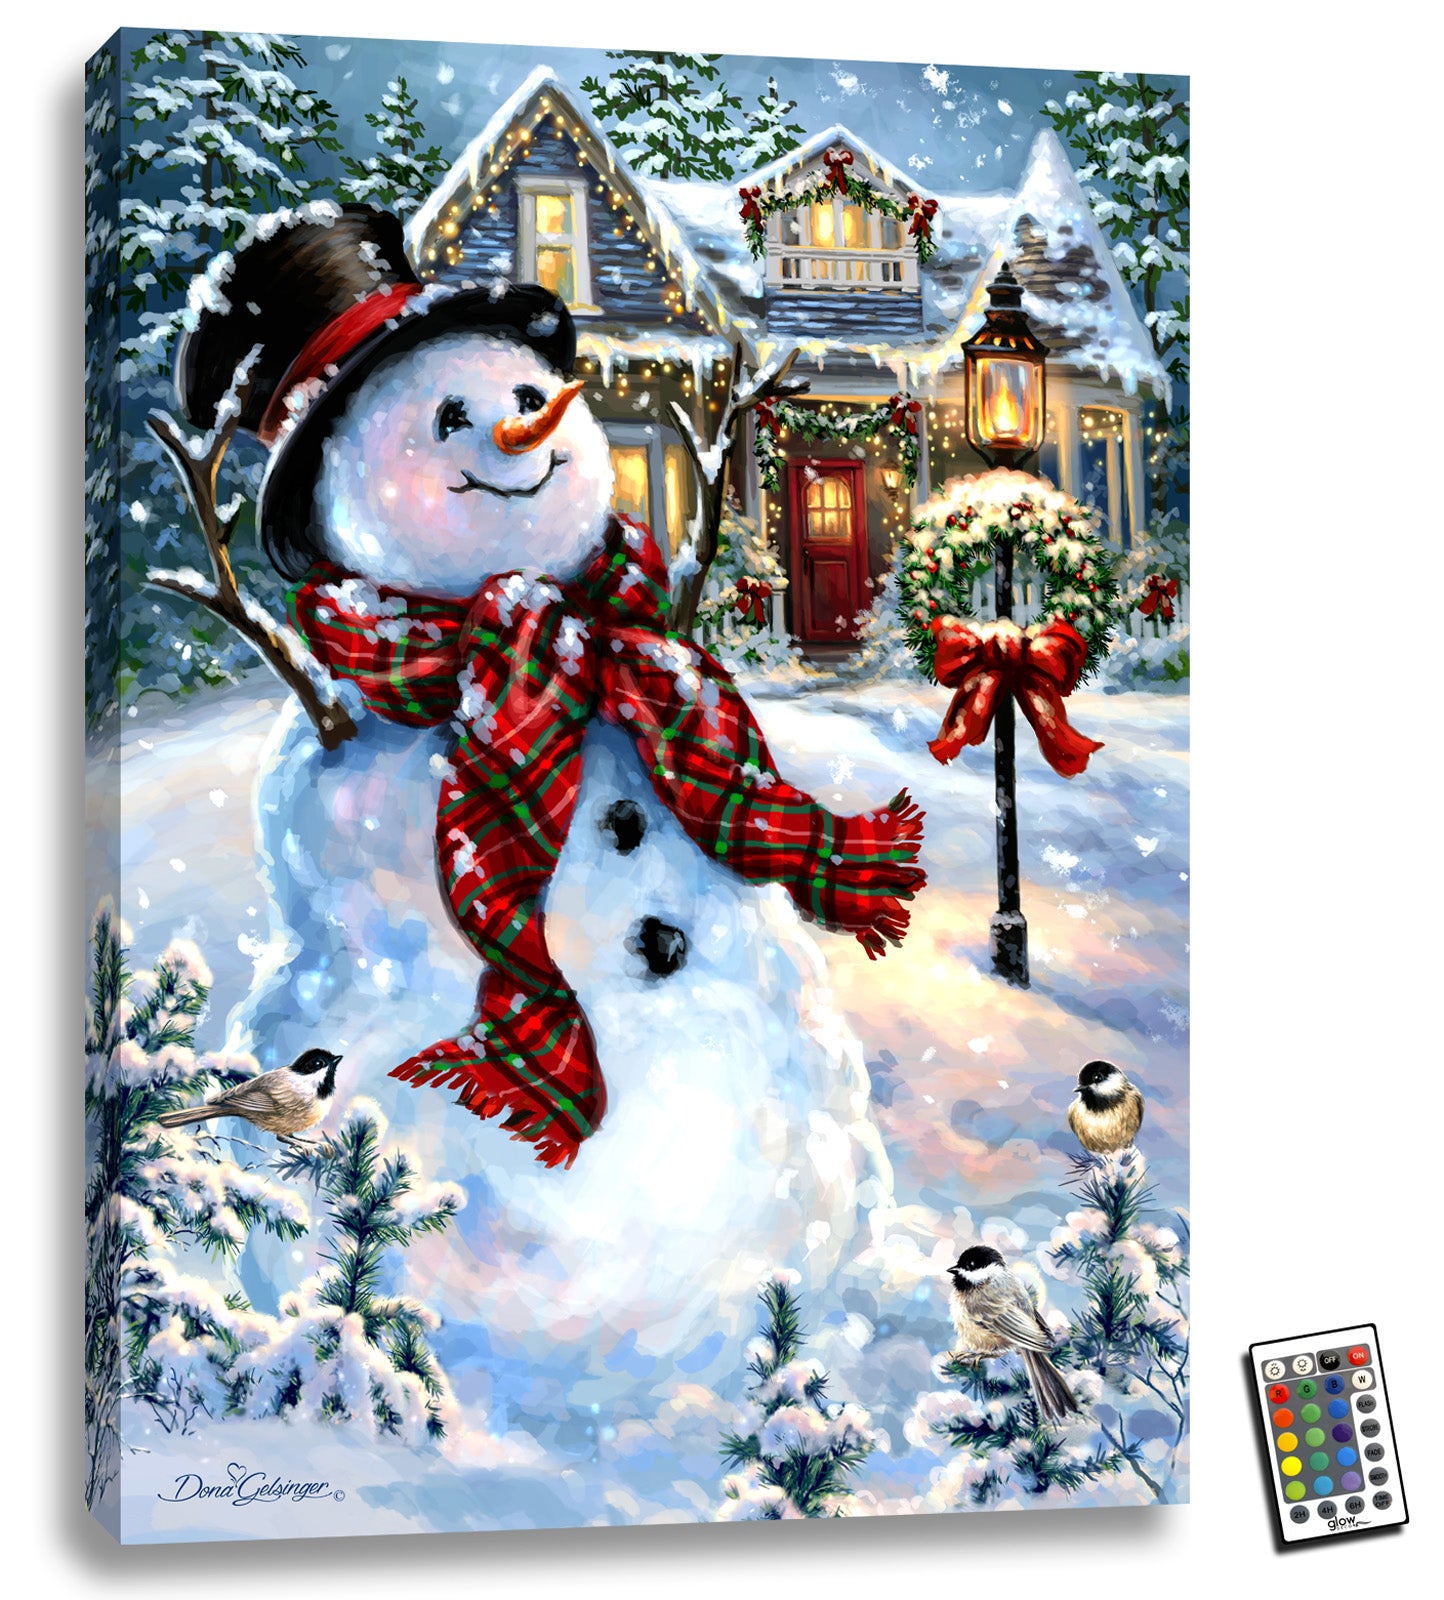 This 18x24 piece features a jolly snowman surrounded by a winter wonderland, complete with a charming snow-covered house in the background.